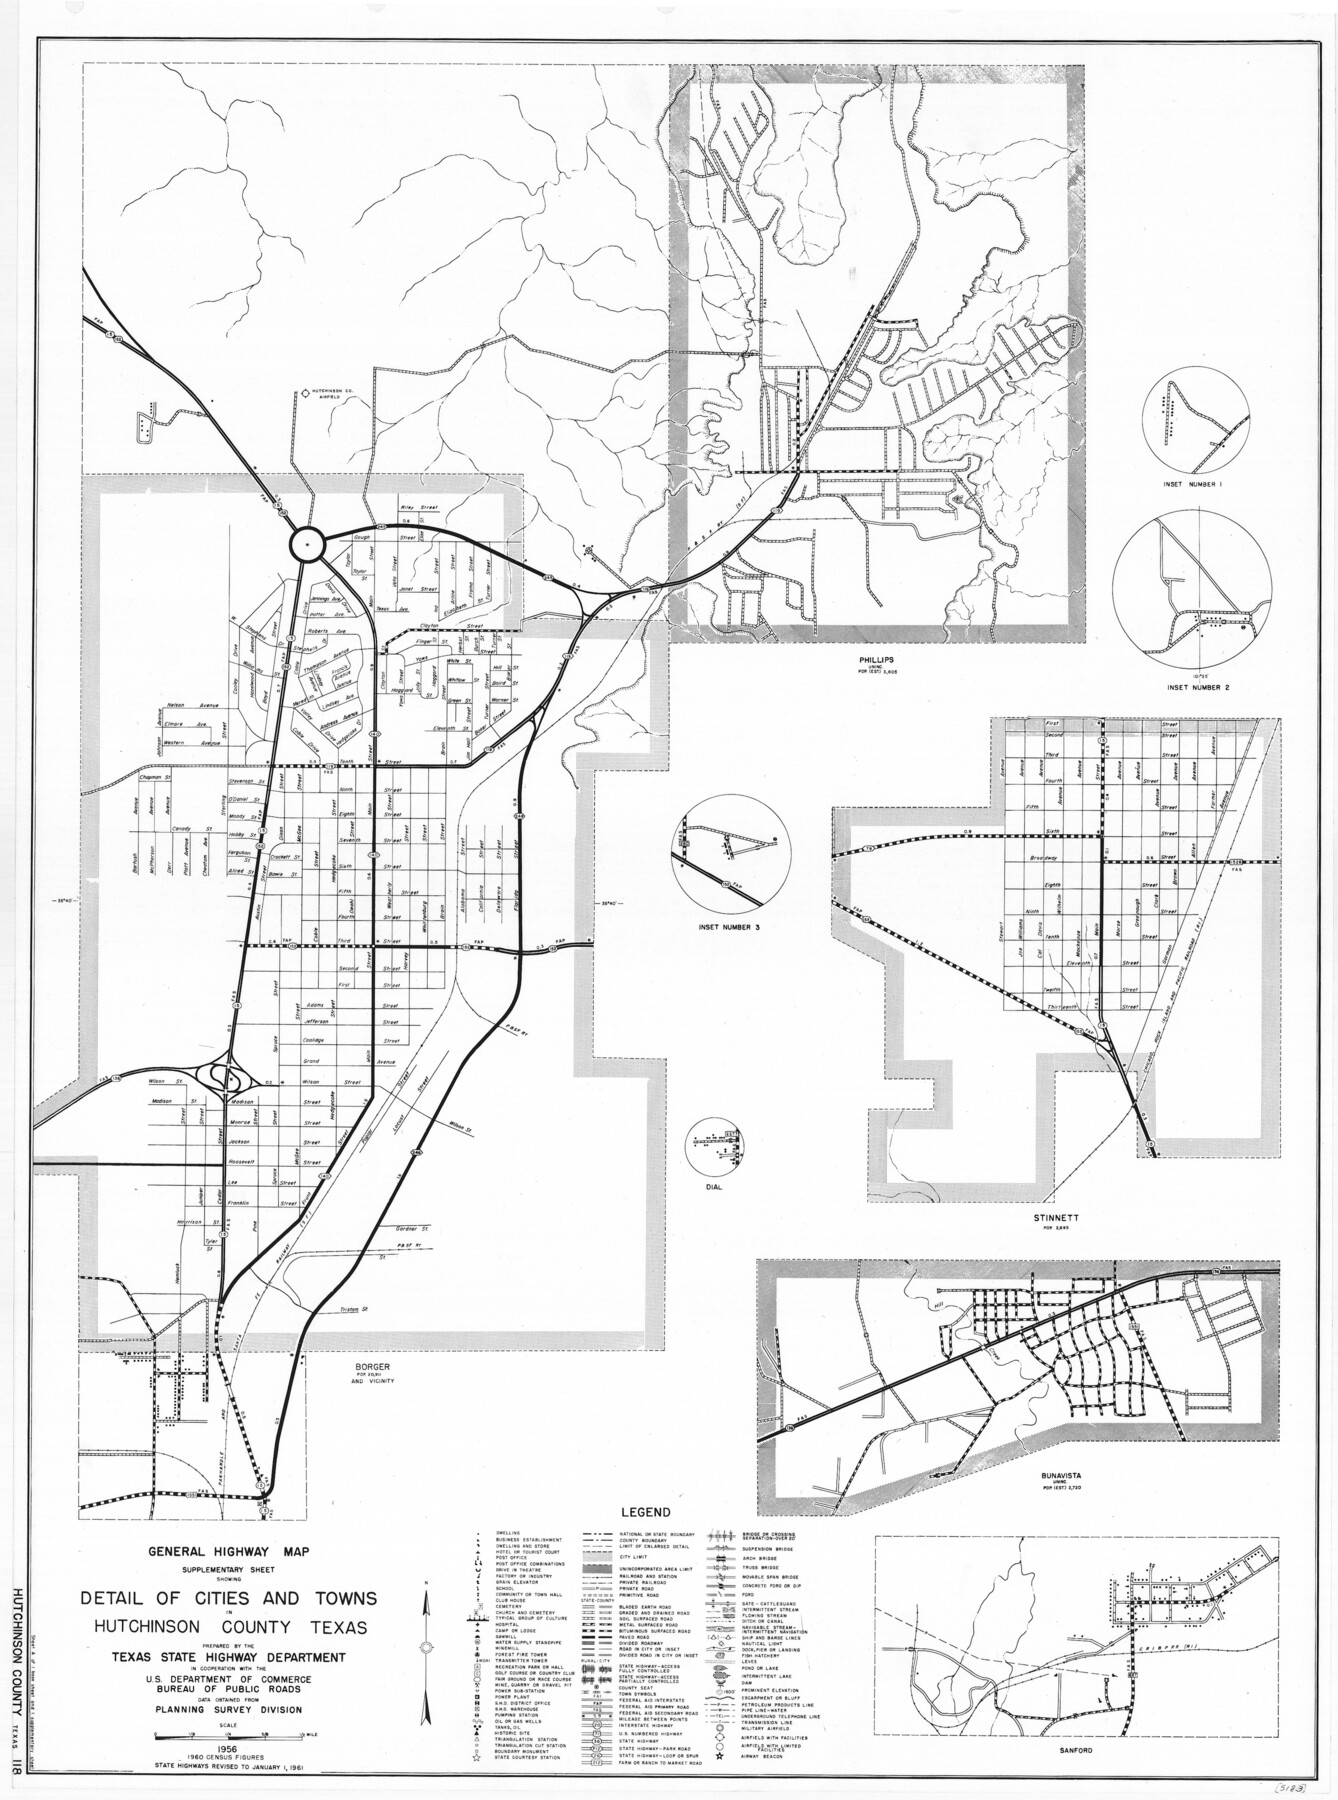 general-highway-map-detail-of-cities-and-towns-in-hutchinson-county